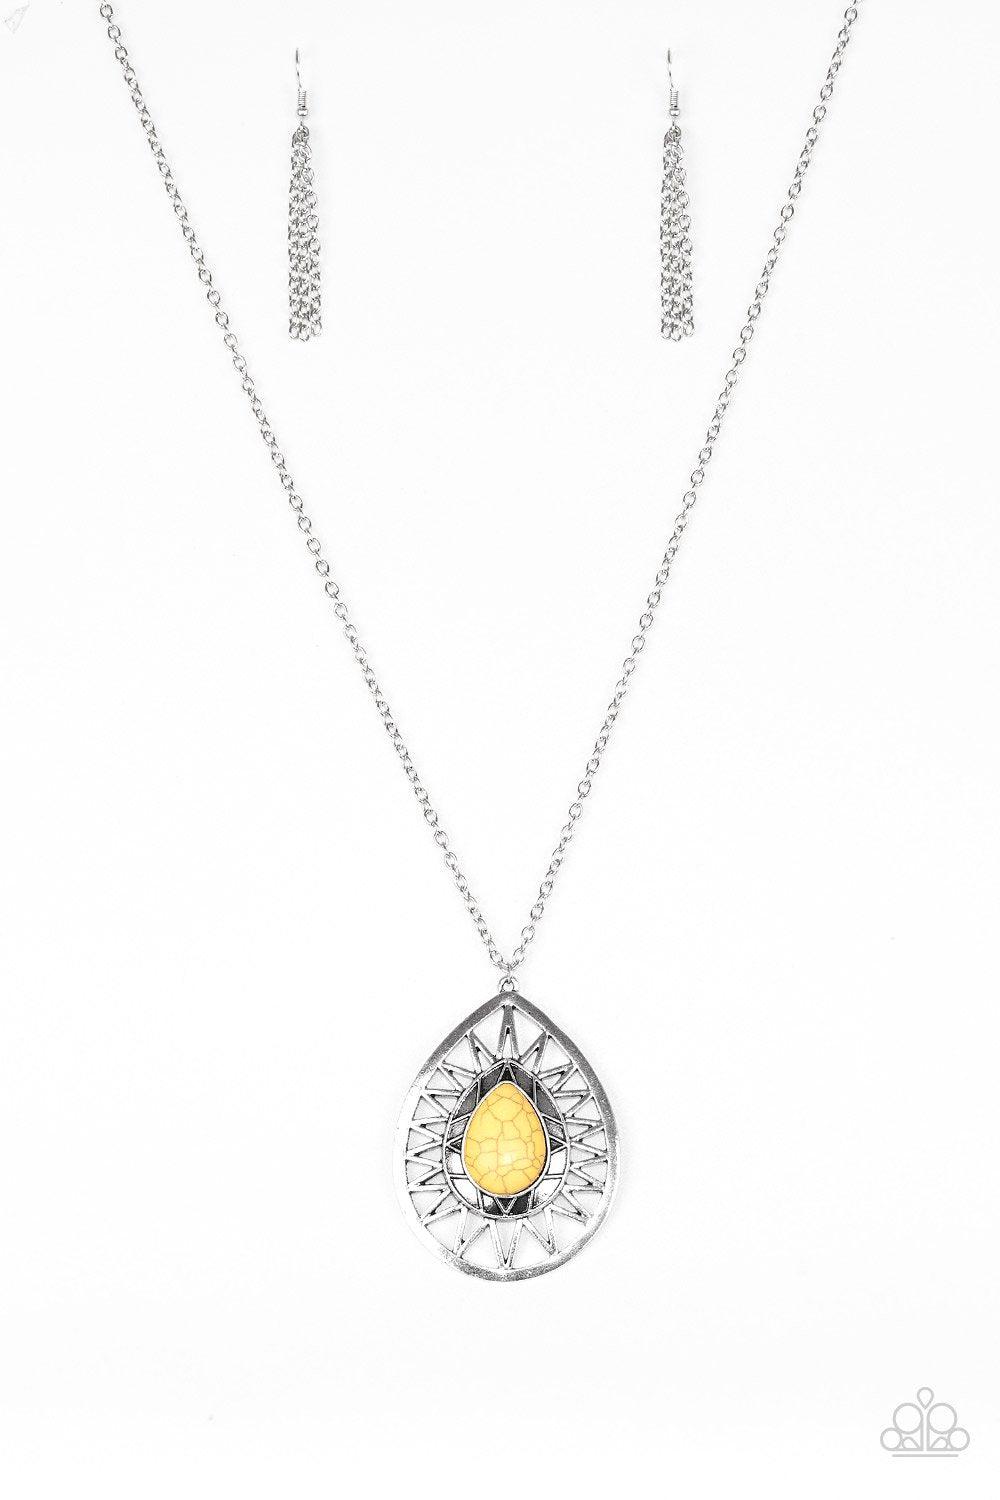 Summer Sunbeam Silver and Yellow Stone Necklace - Paparazzi Accessories-CarasShop.com - $5 Jewelry by Cara Jewels